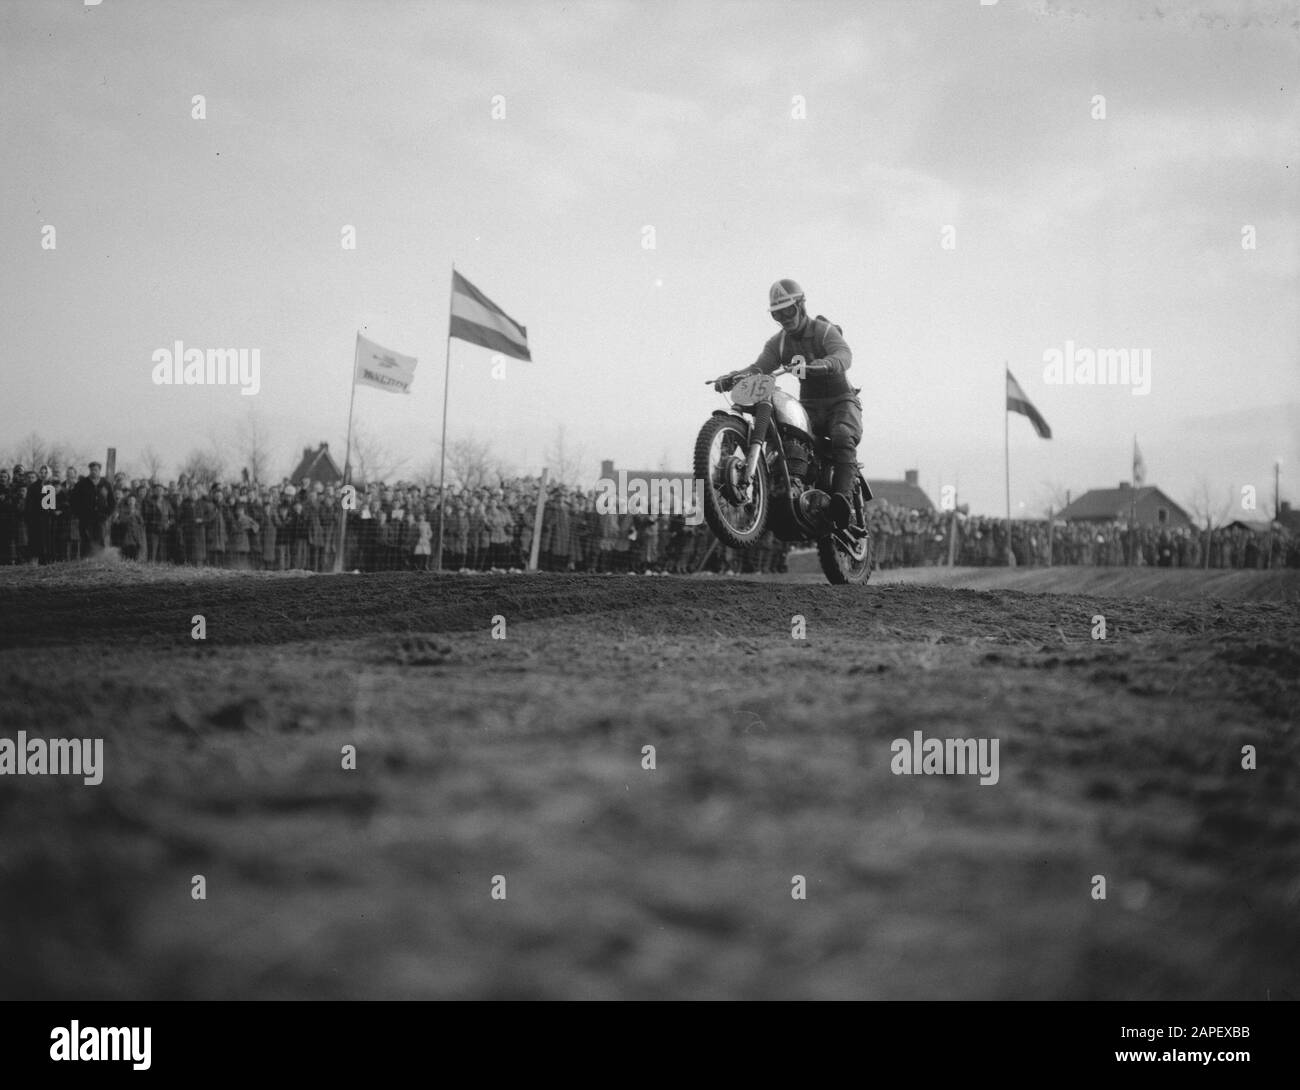 Bill Milsson (Sweden on Cresent) Date: March 16, 1958 Location: Sweden Keywords: motorcrosses Personal name: Bill Milsson Stock Photo